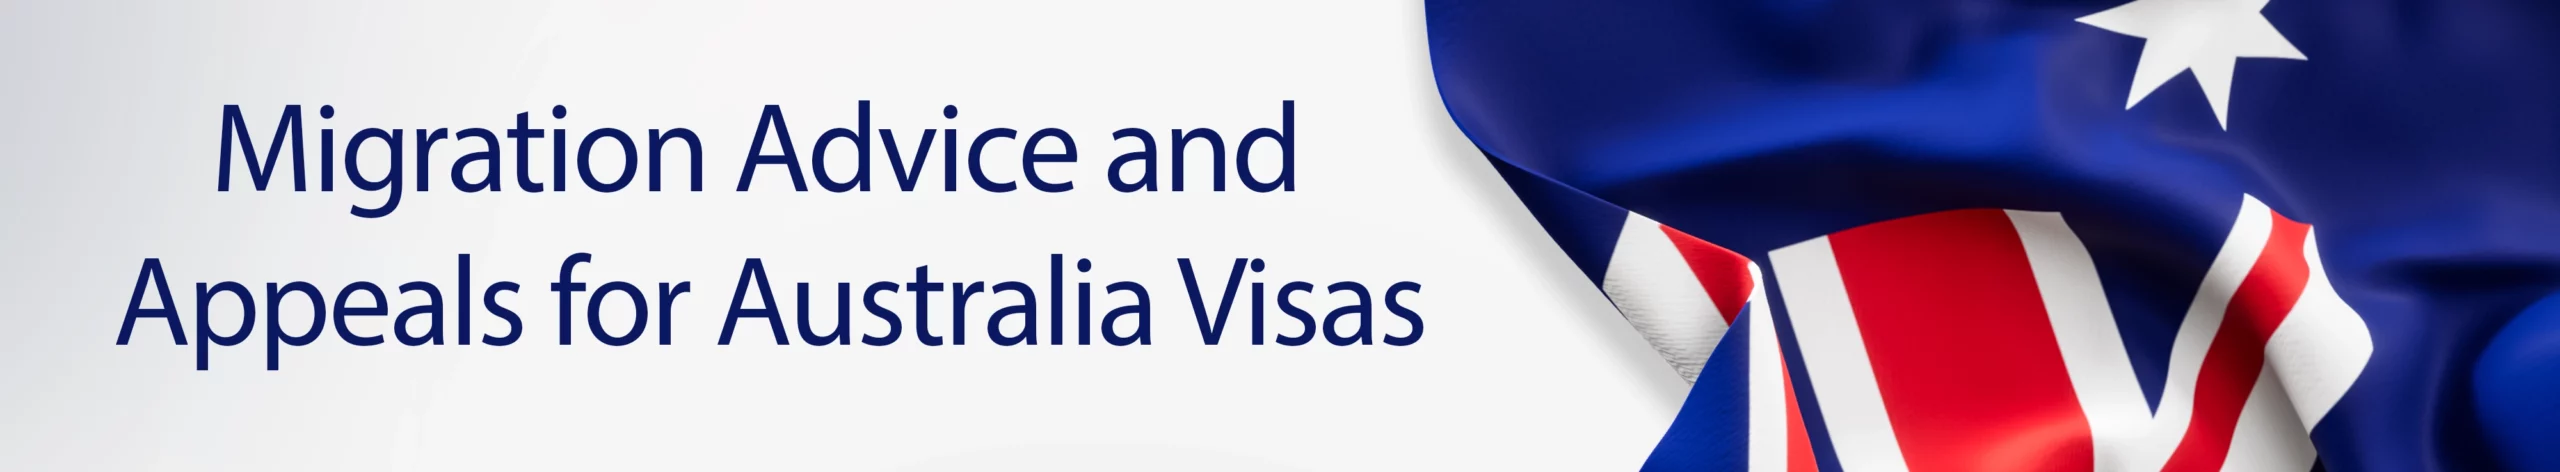 Migration Advice and Appeals for Australia Visas banner